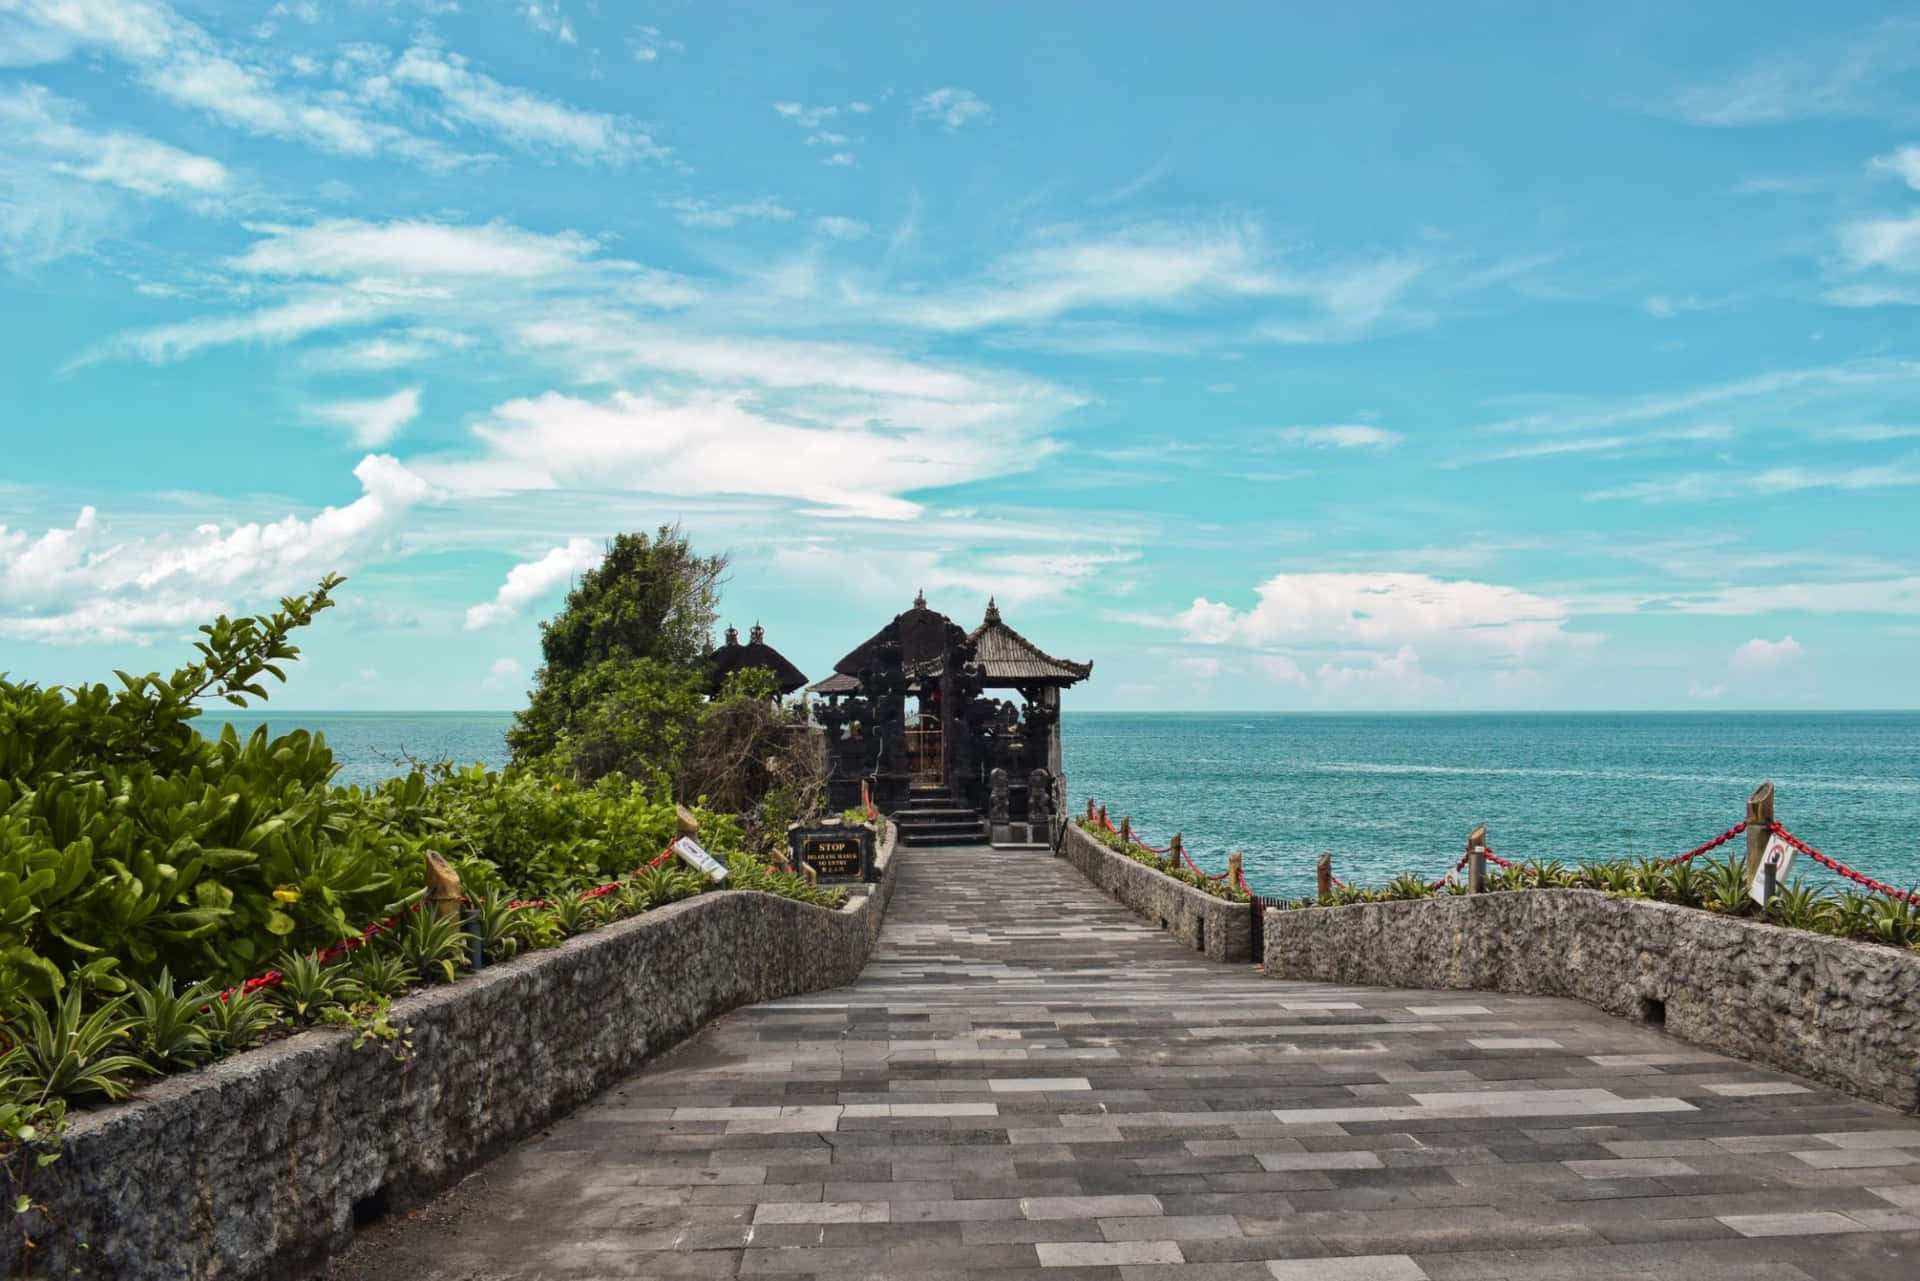 "Find your paradise in the breathtaking beauty of Bali!"